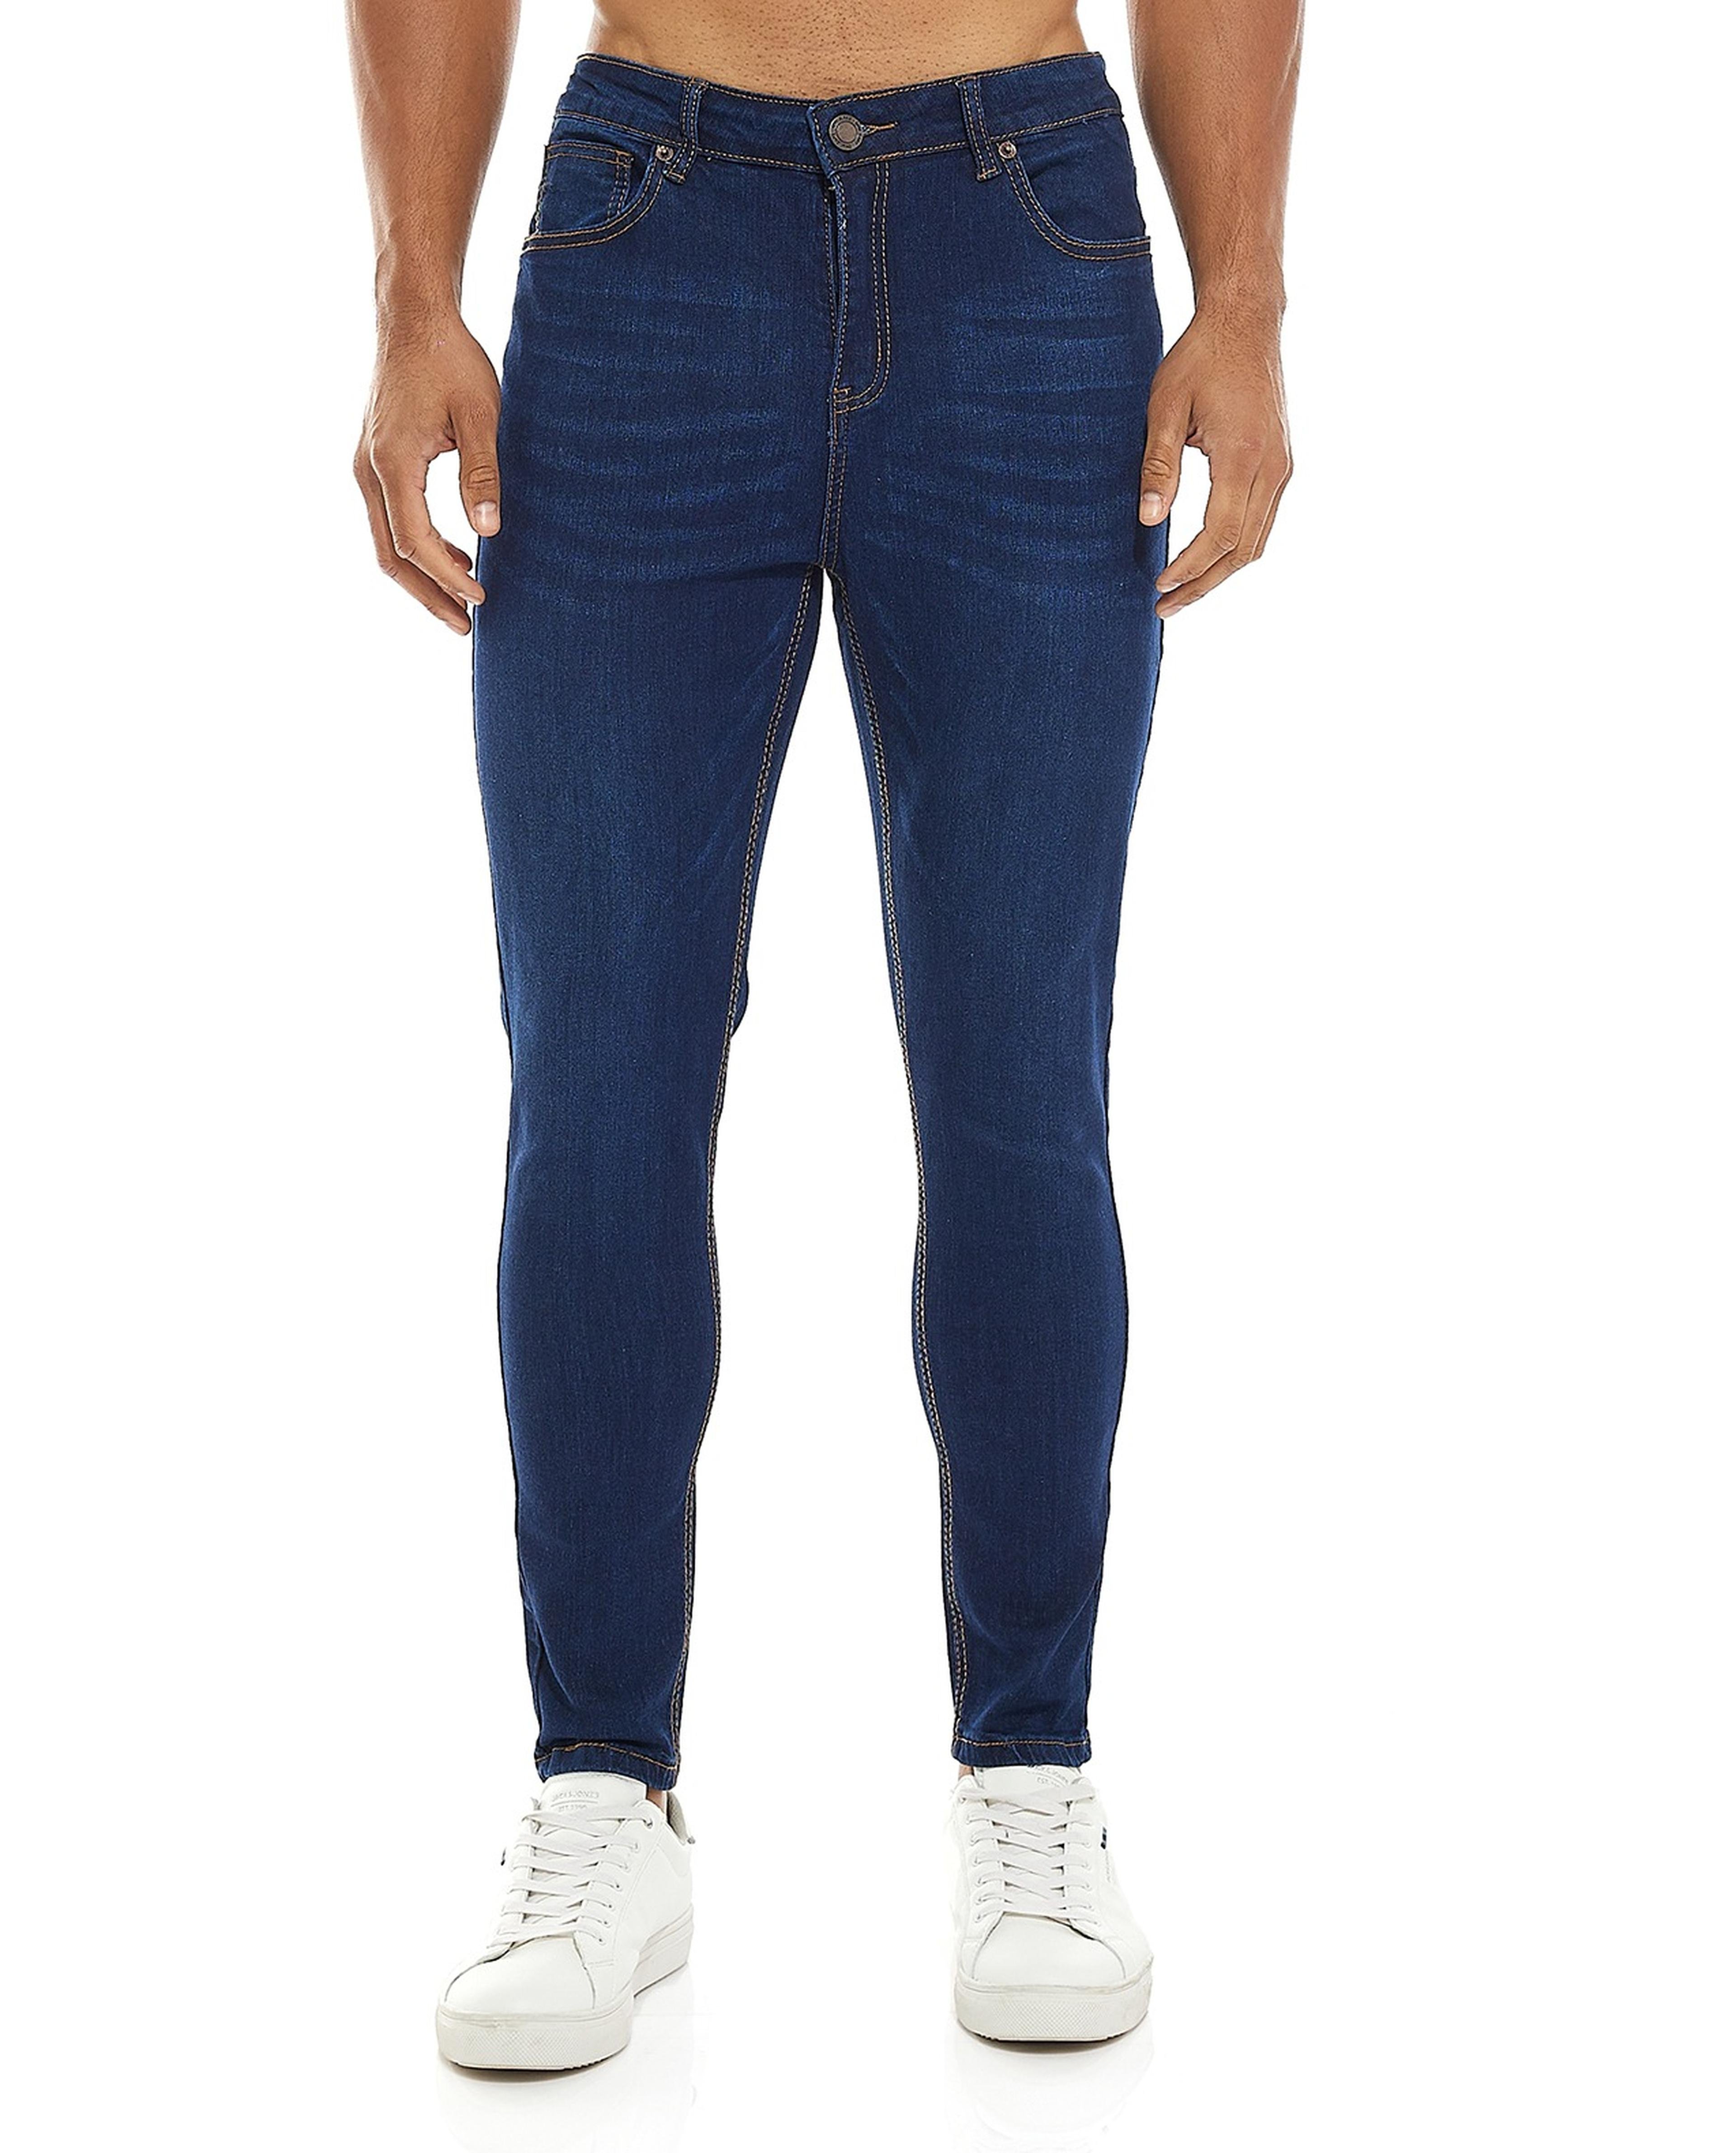 Faded Skinny Fit Jeans